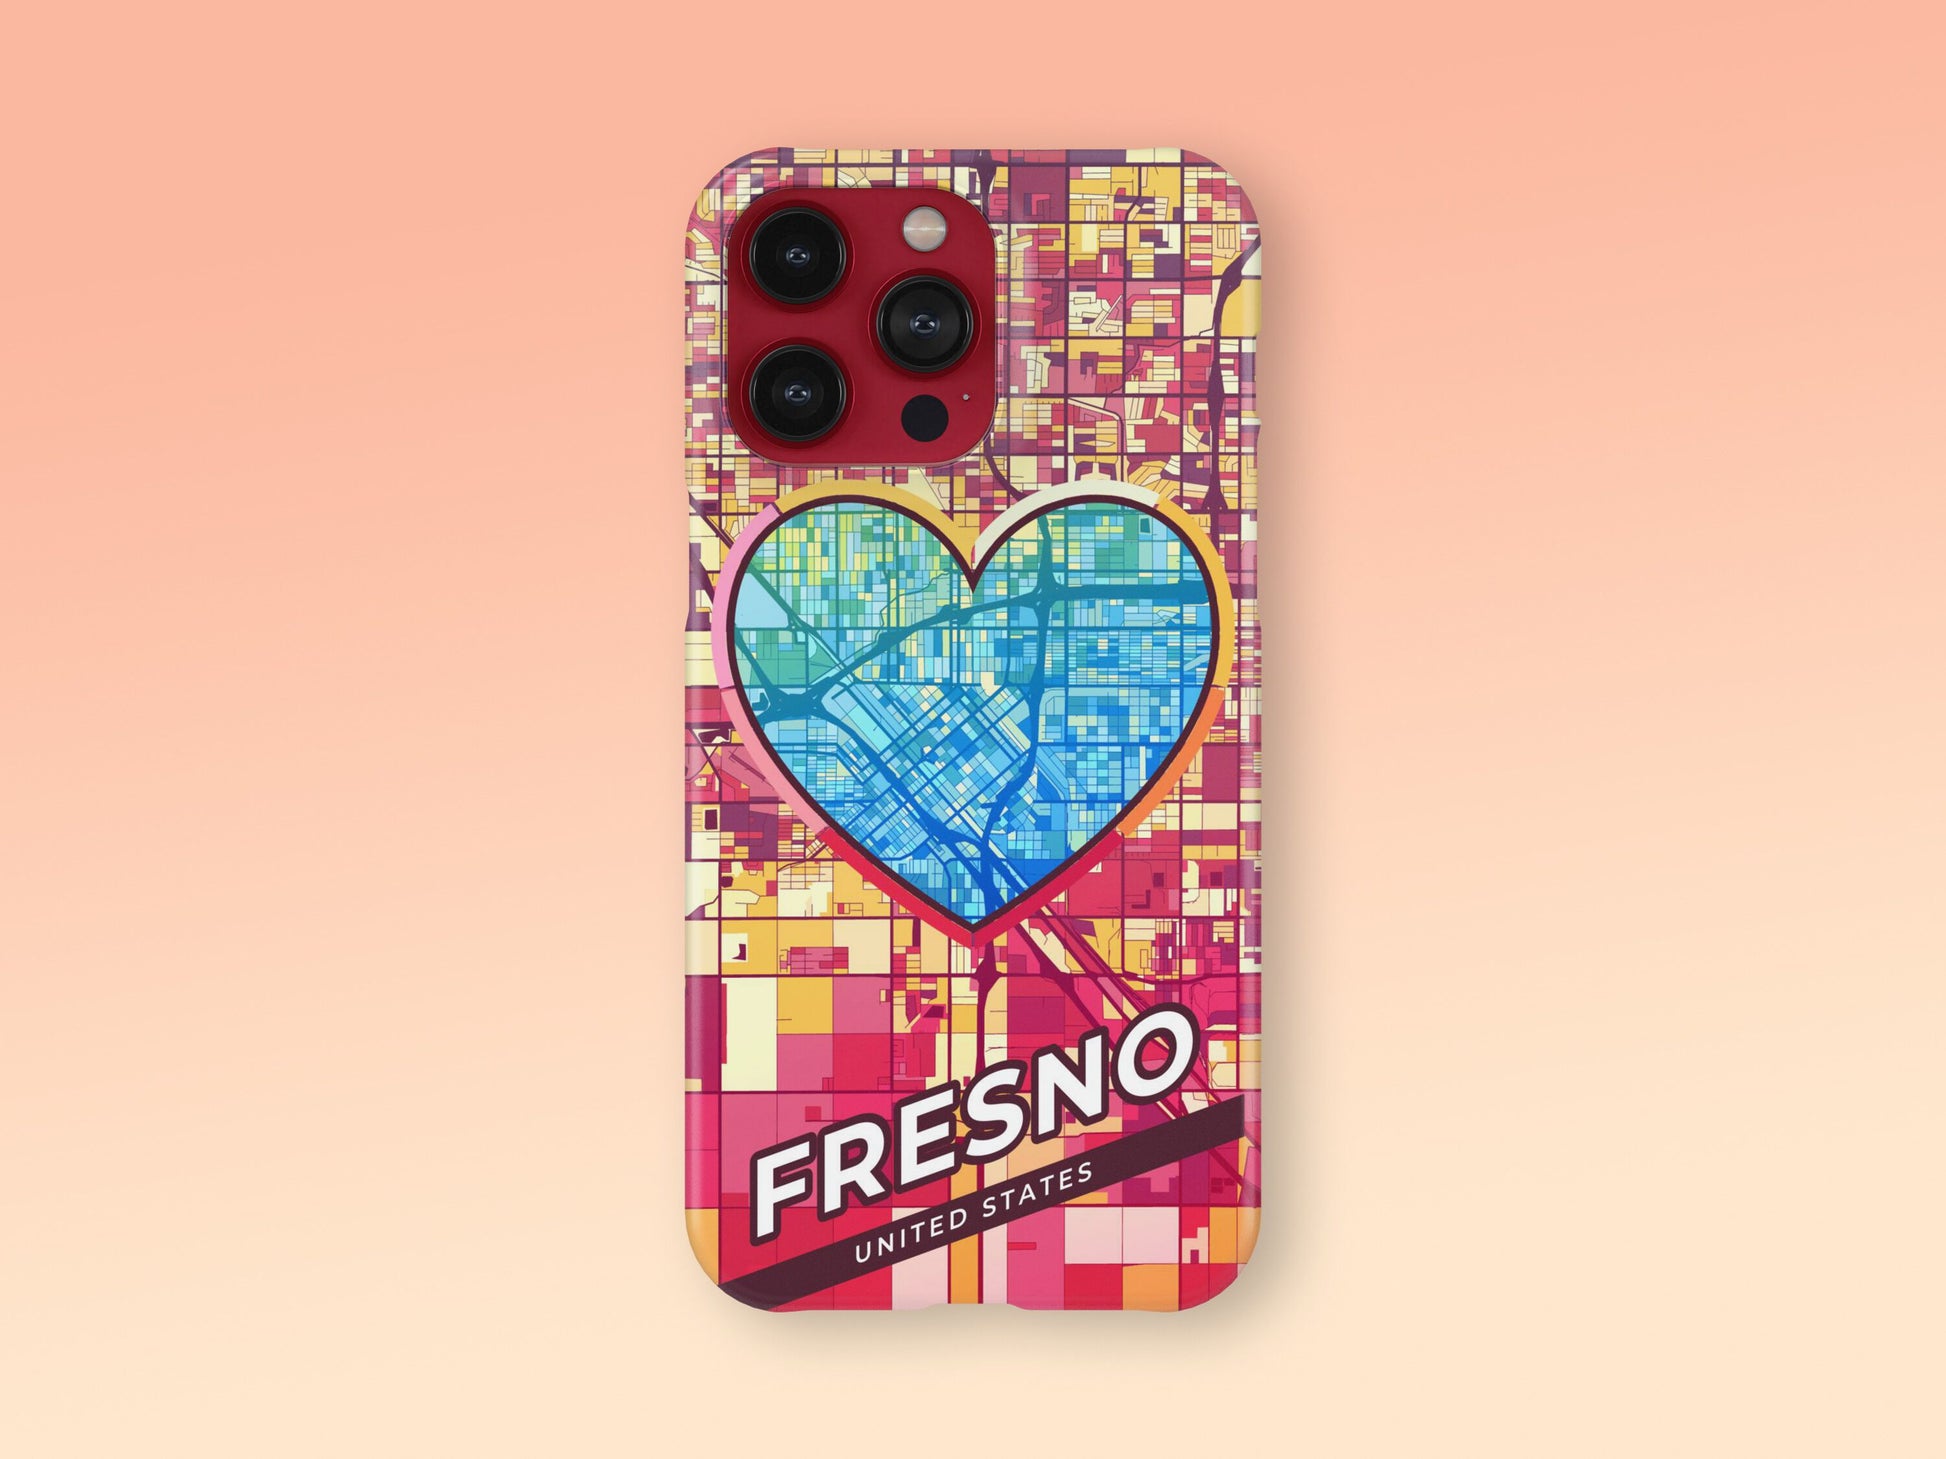 Fresno California slim phone case with colorful icon. Birthday, wedding or housewarming gift. Couple match cases. 2